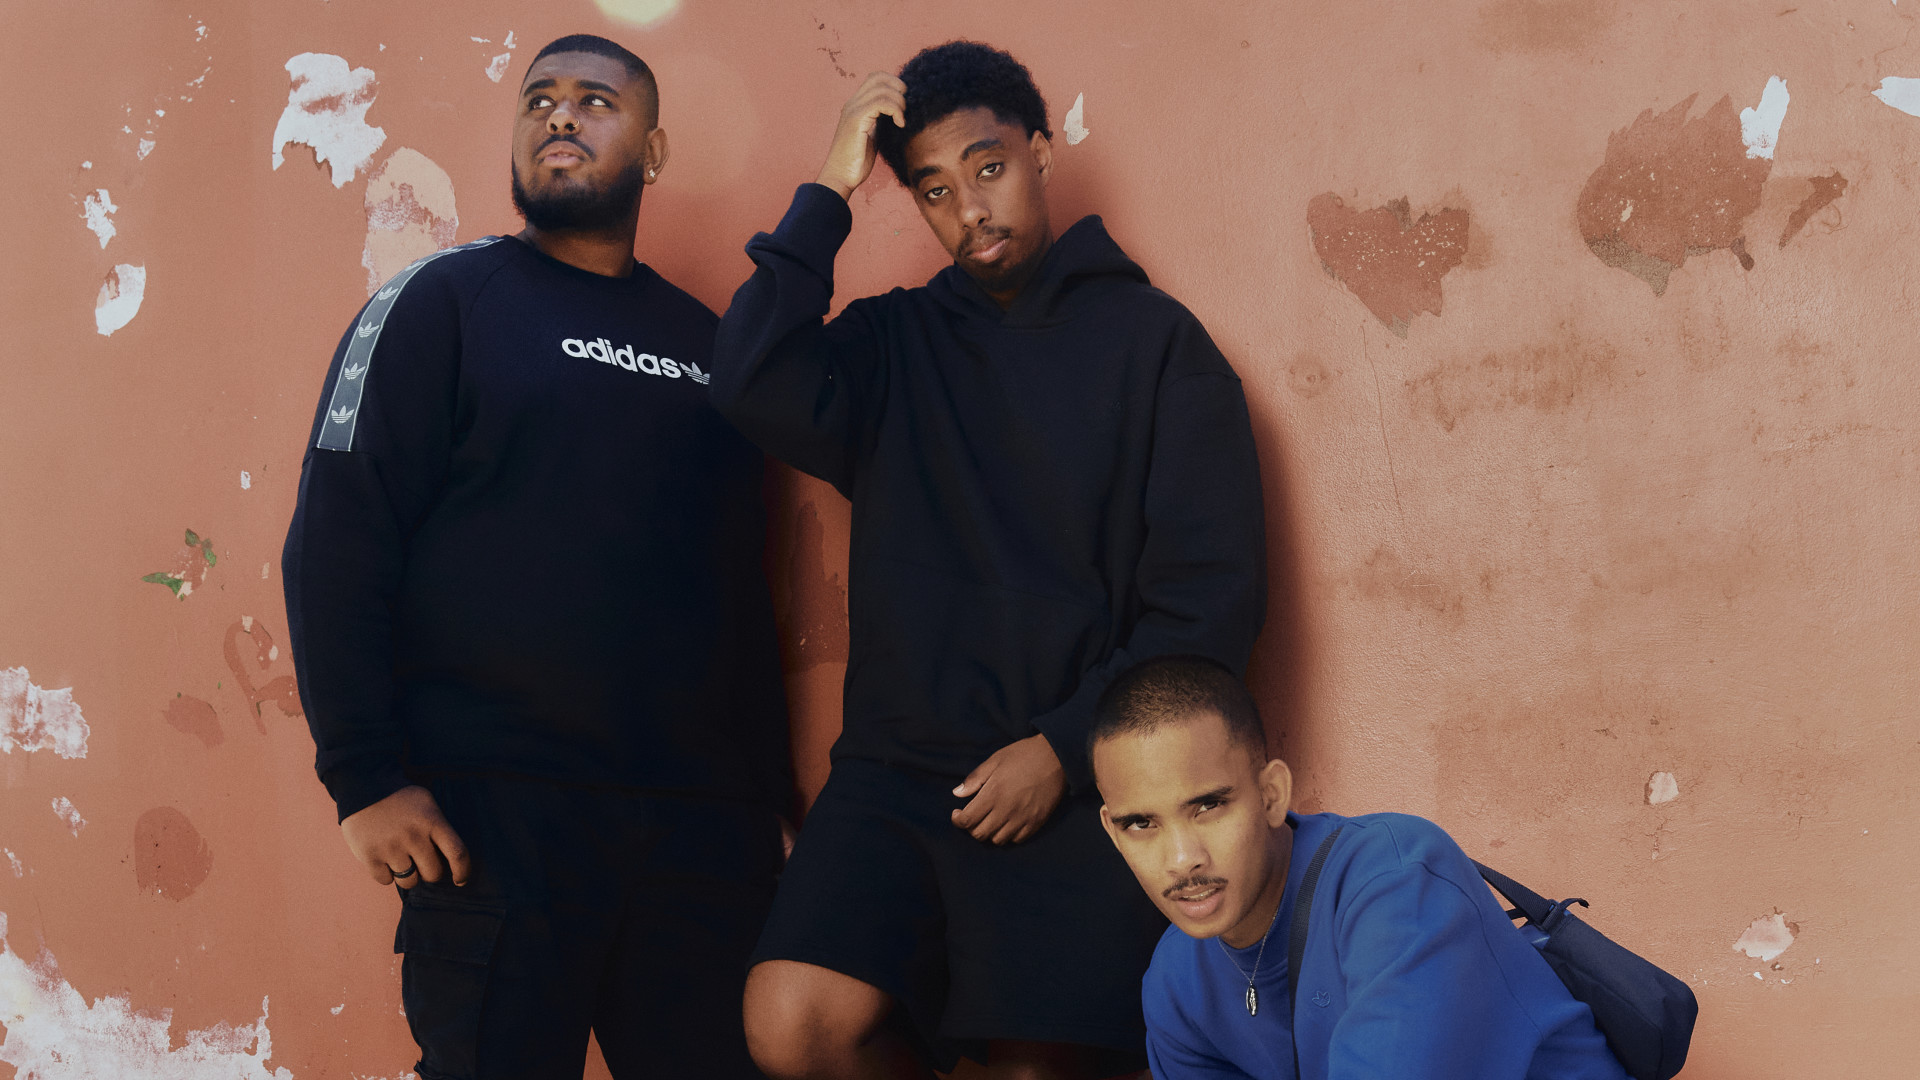 JD Sports Embrace Terrace Culture Down Under With New Short Film Featuring Riddim and Let Em Shoot